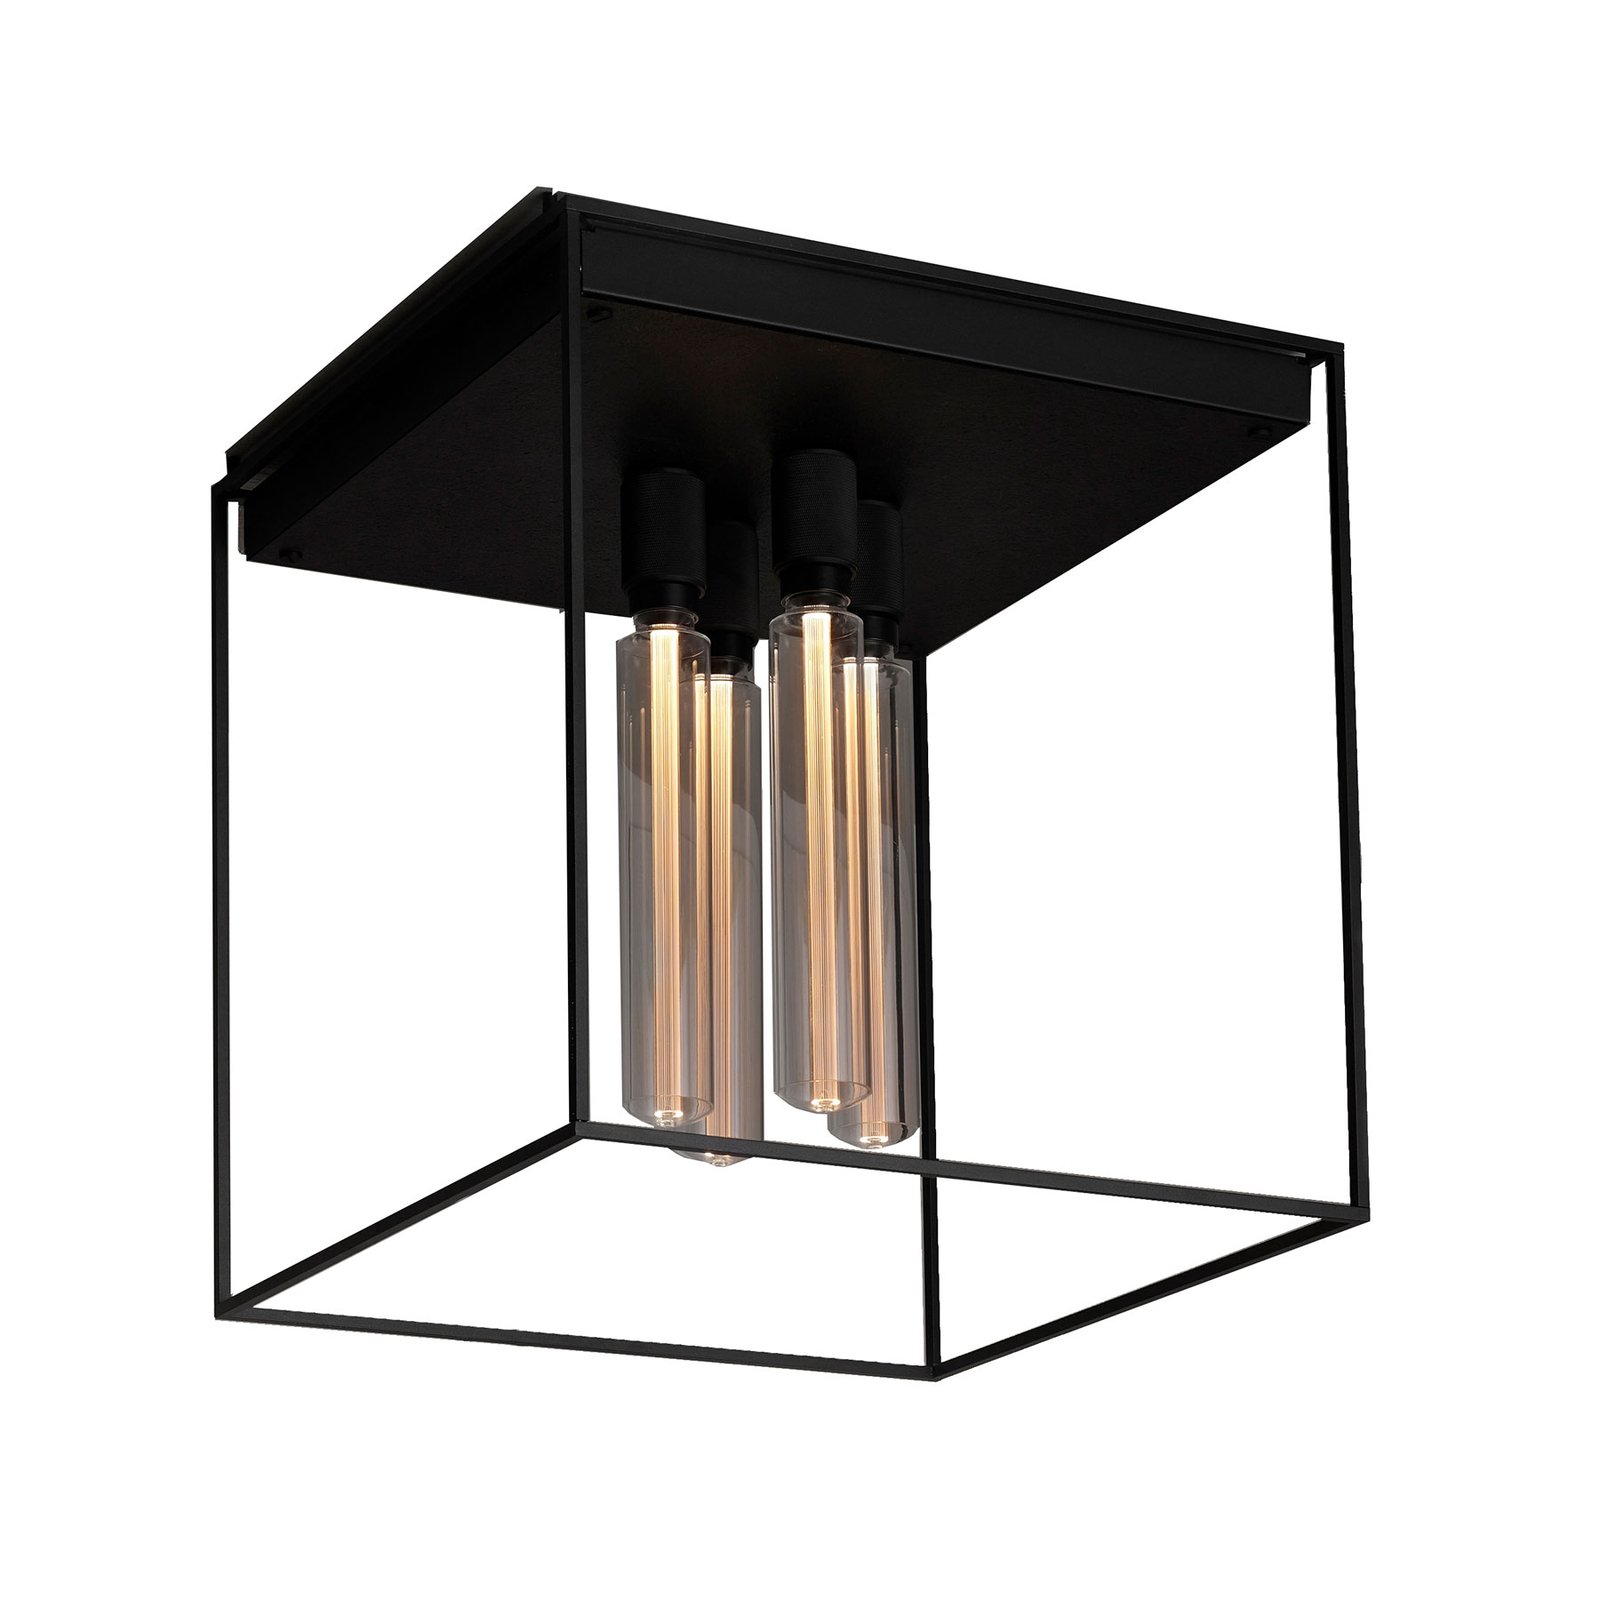 Buster + Punch Caged Ceiling 4.0 LED mármol black